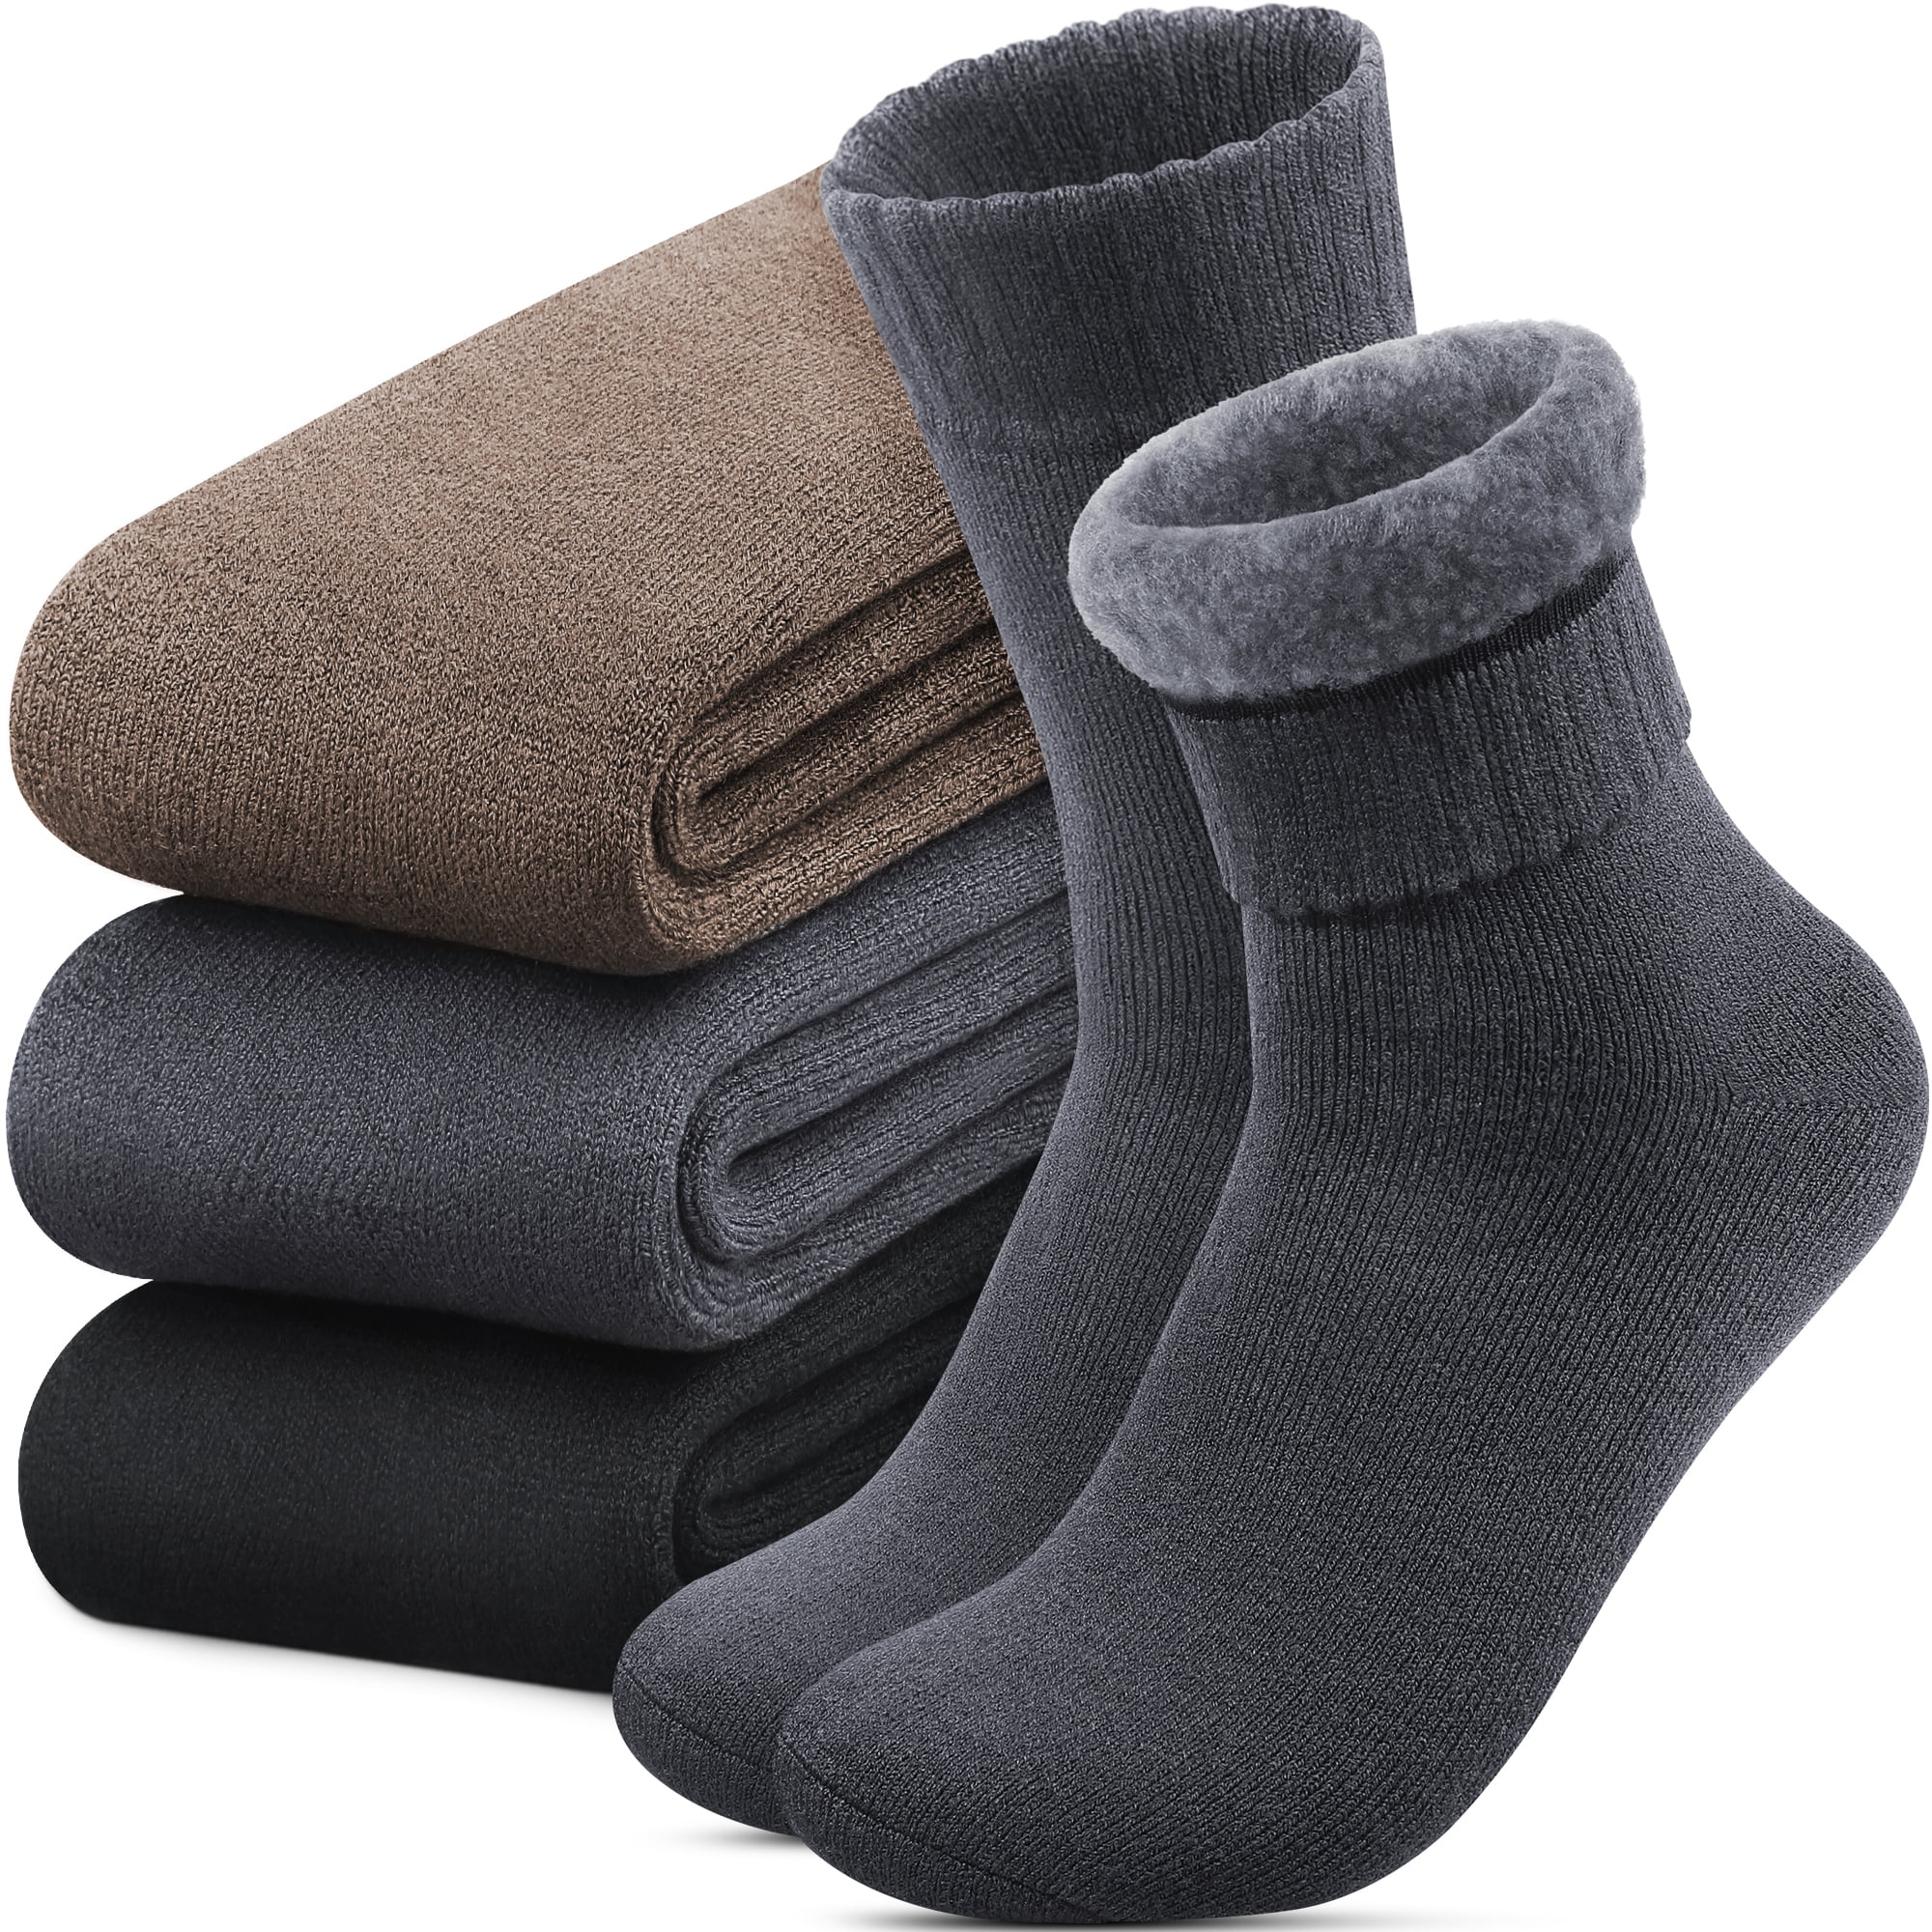 Thermal Socks for Men 6-13, Thick Winter Outdoors Warm Socks Mens, Soft ...